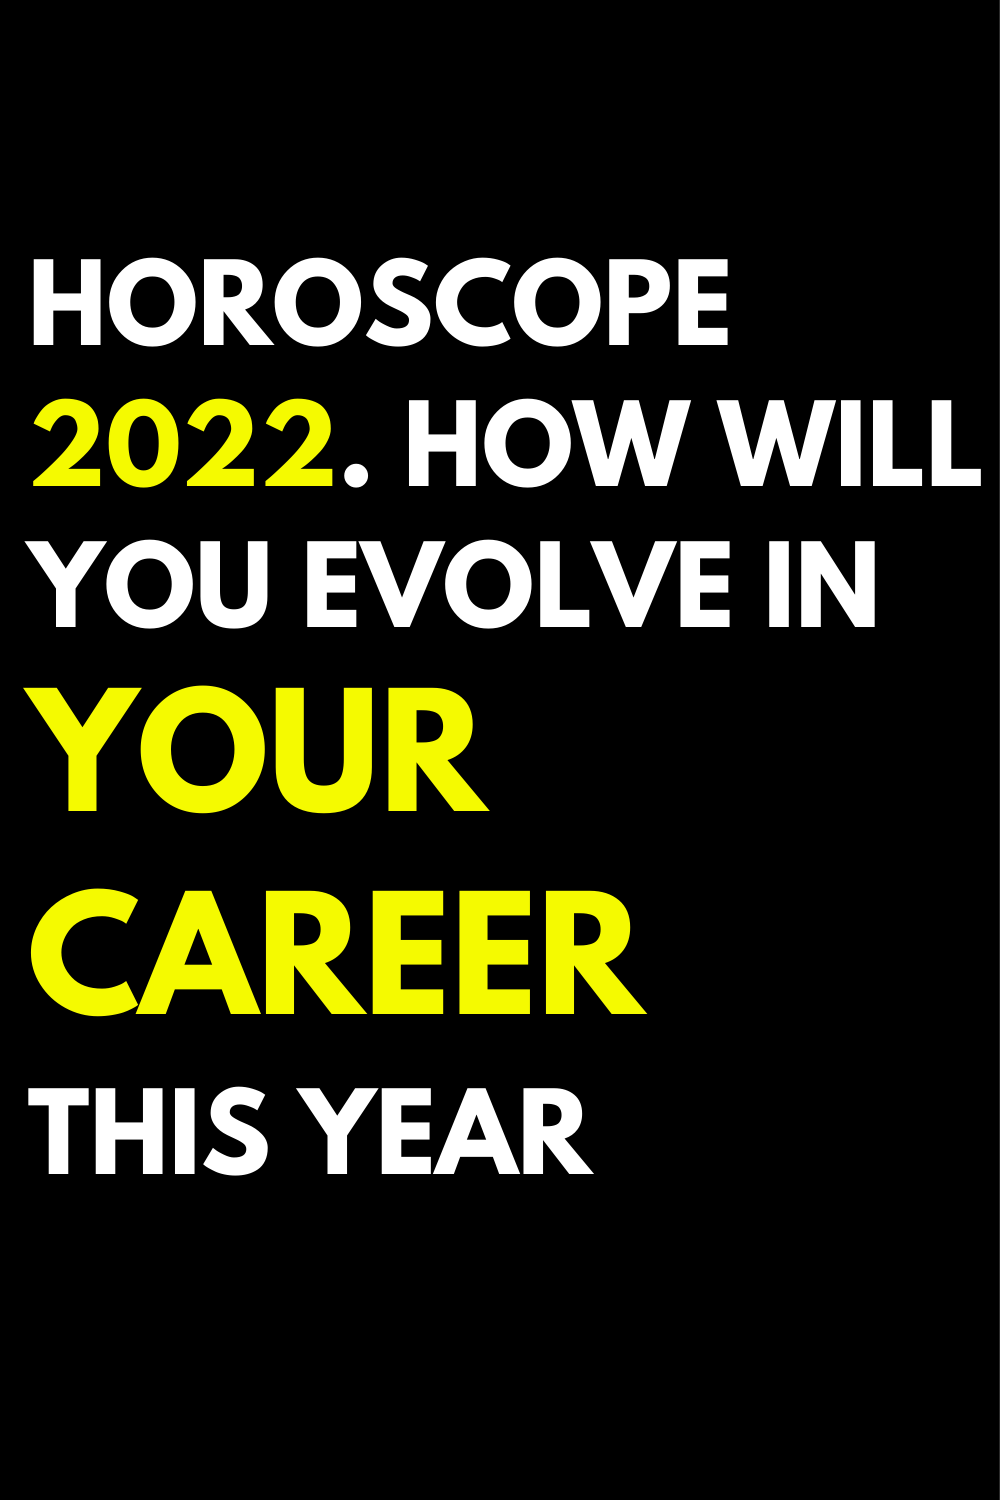 Horoscope 2022. How will you evolve in your career this year